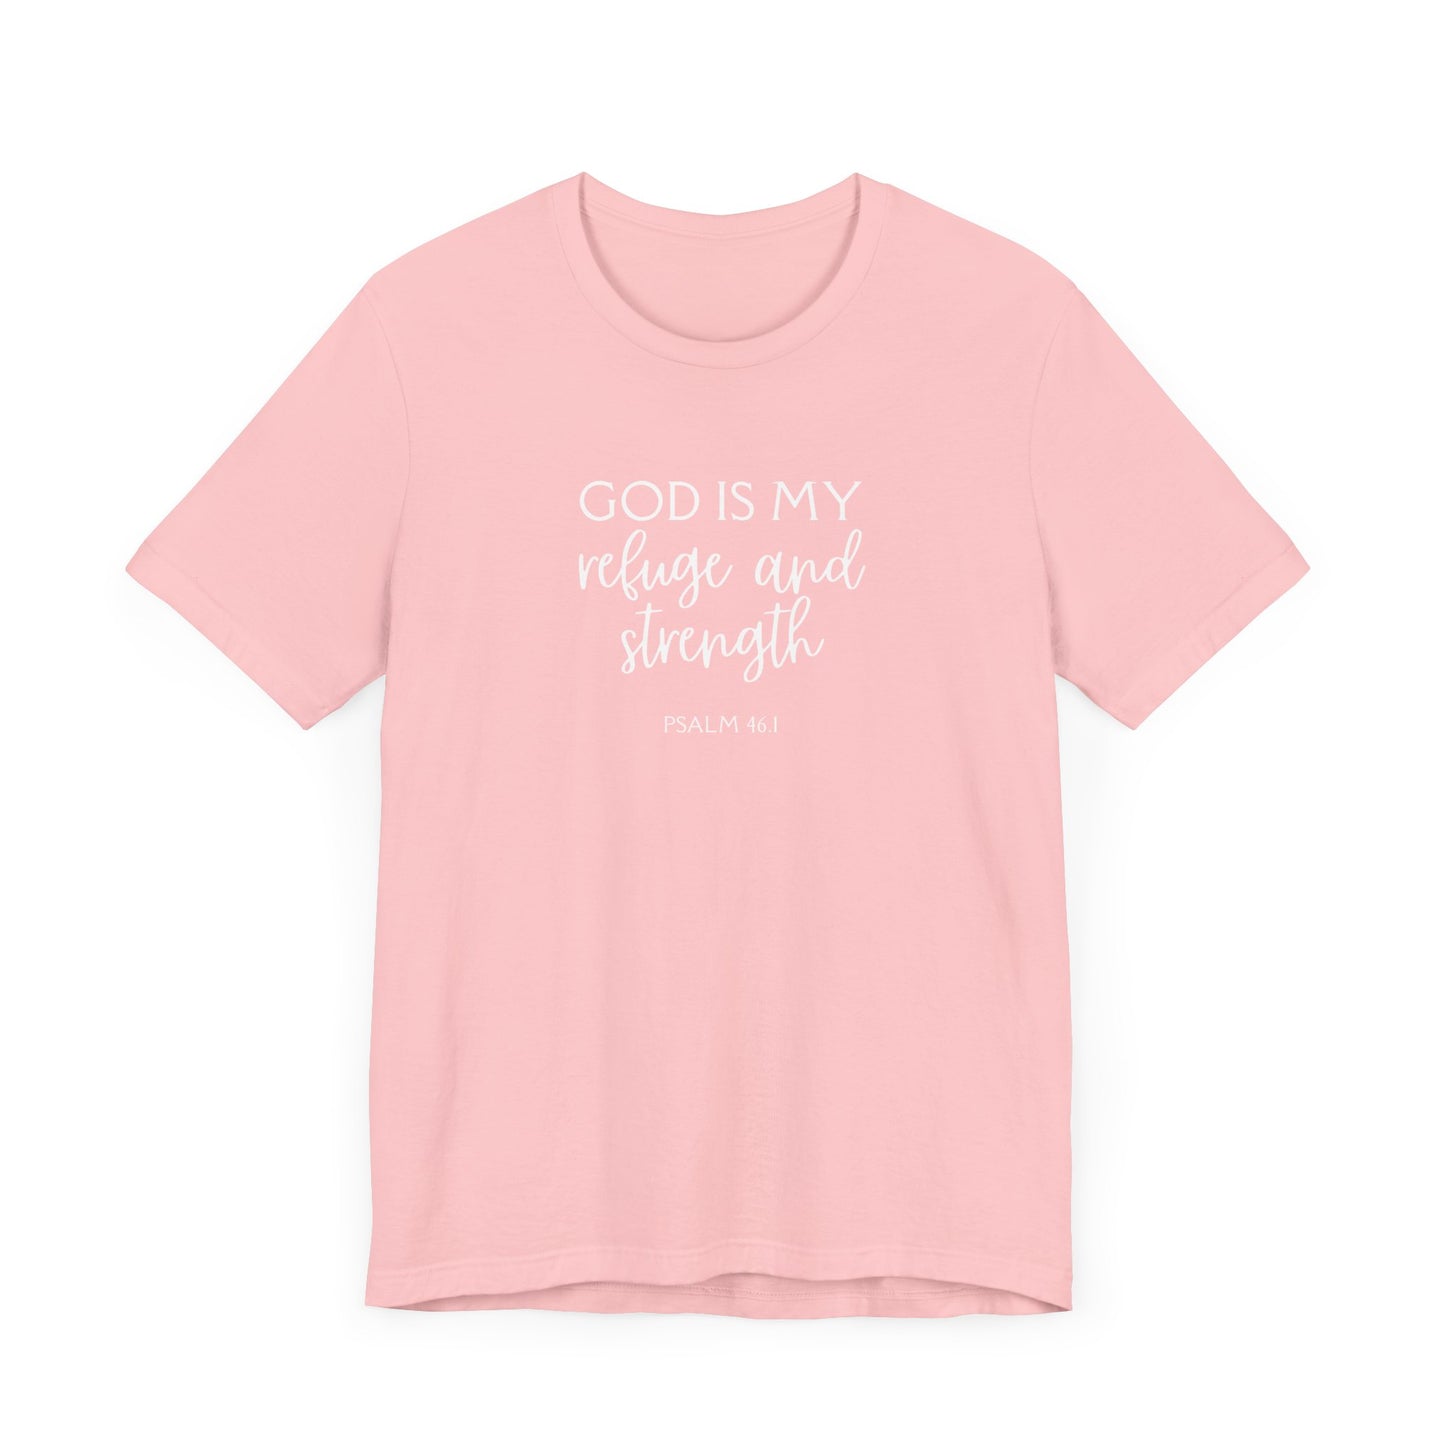 God Is My Refuge And My Strength T-shirt, Proverbs Tee